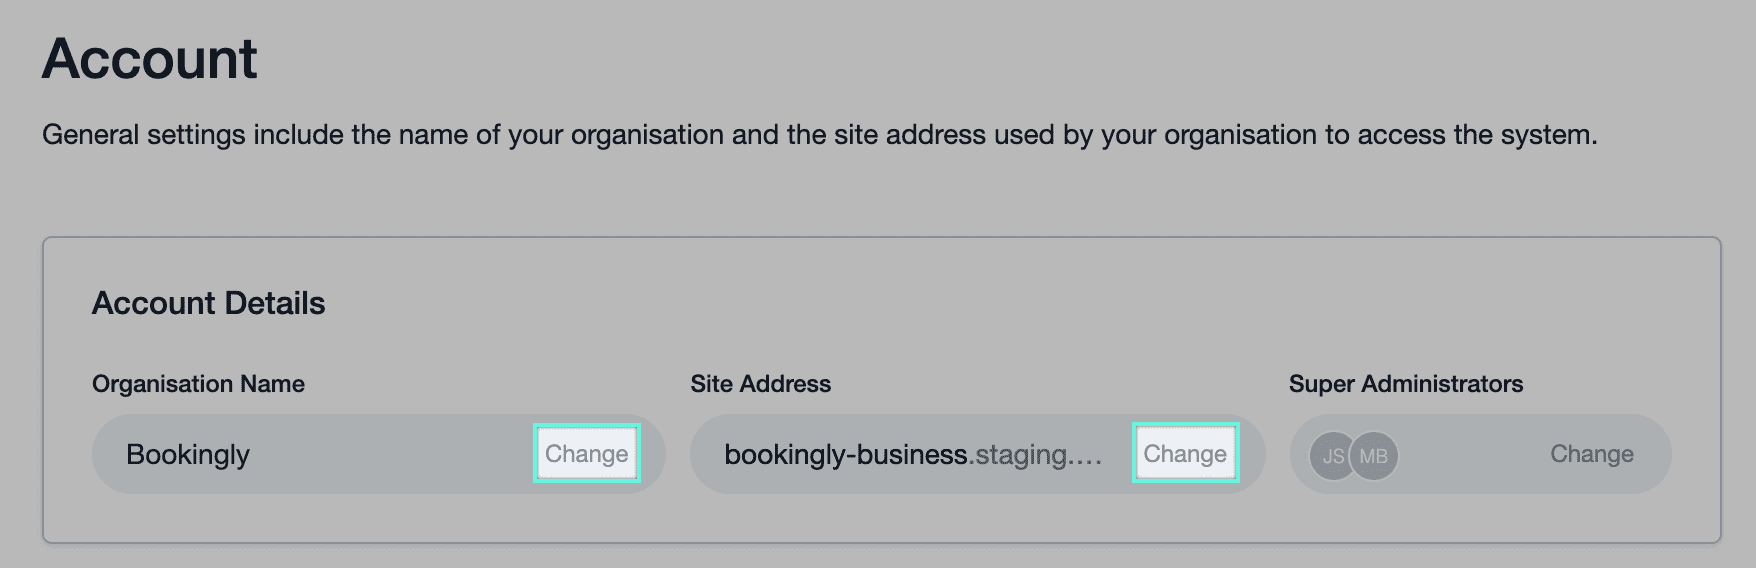 Organization name and site address link with 'change' buttons next to each which allow the user to update